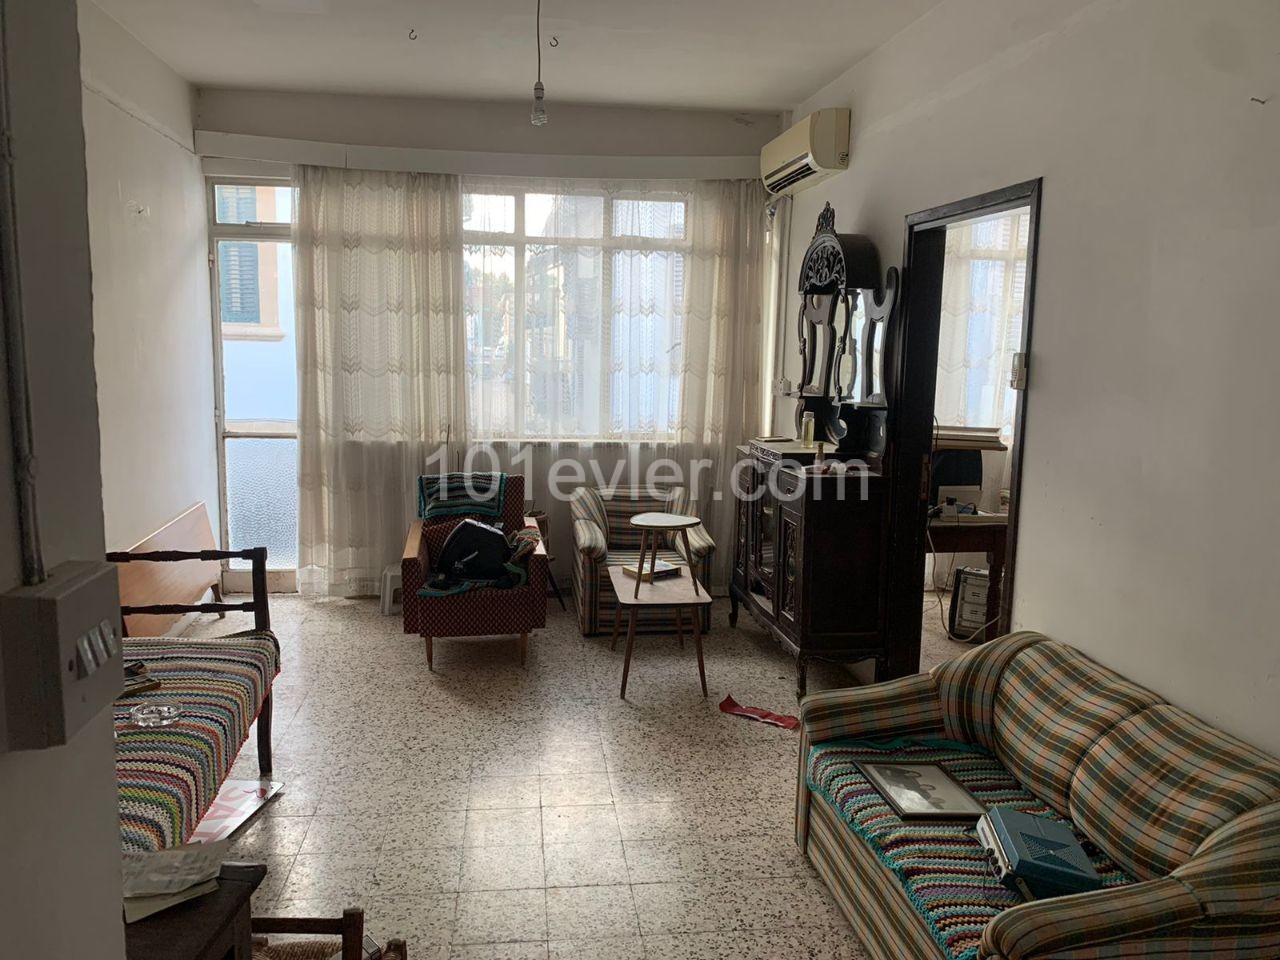 Detached House To Rent in Kumsal, Nicosia